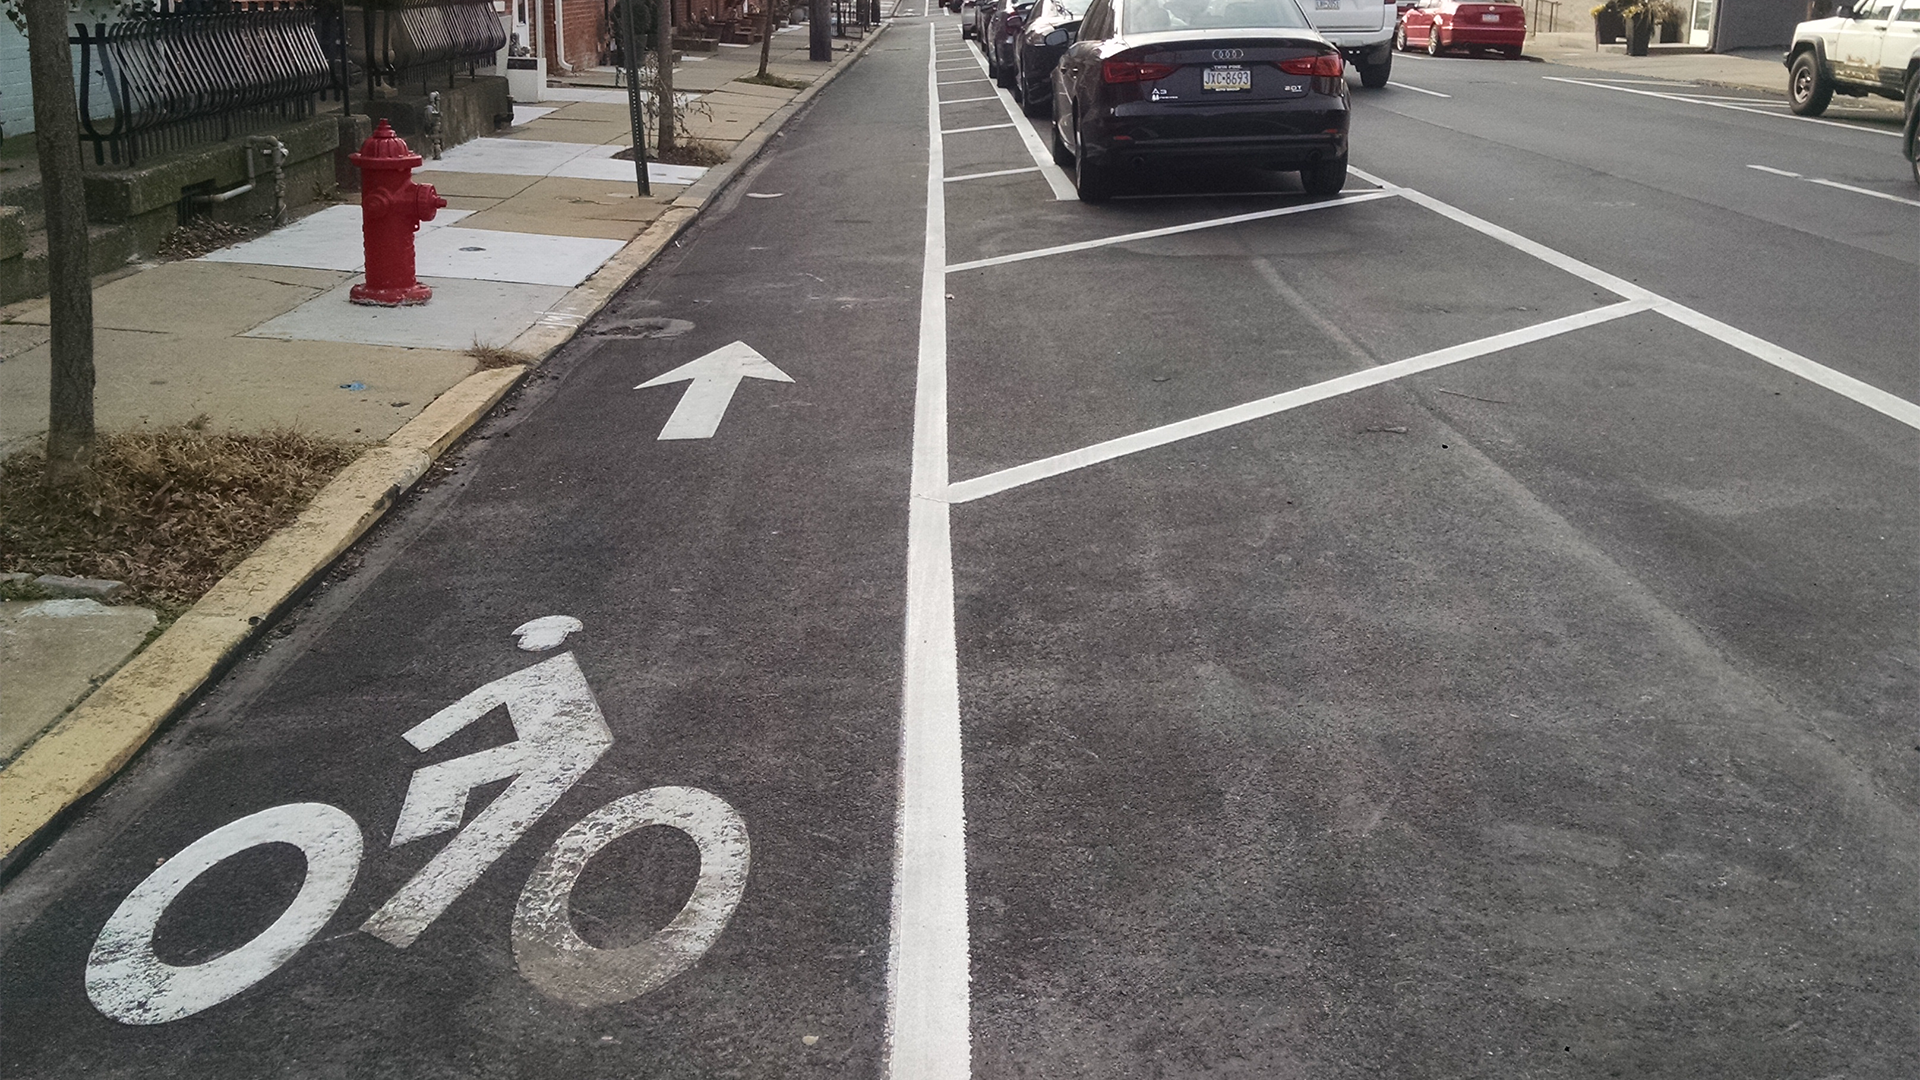 Image of bike lane on street with parking on the right.